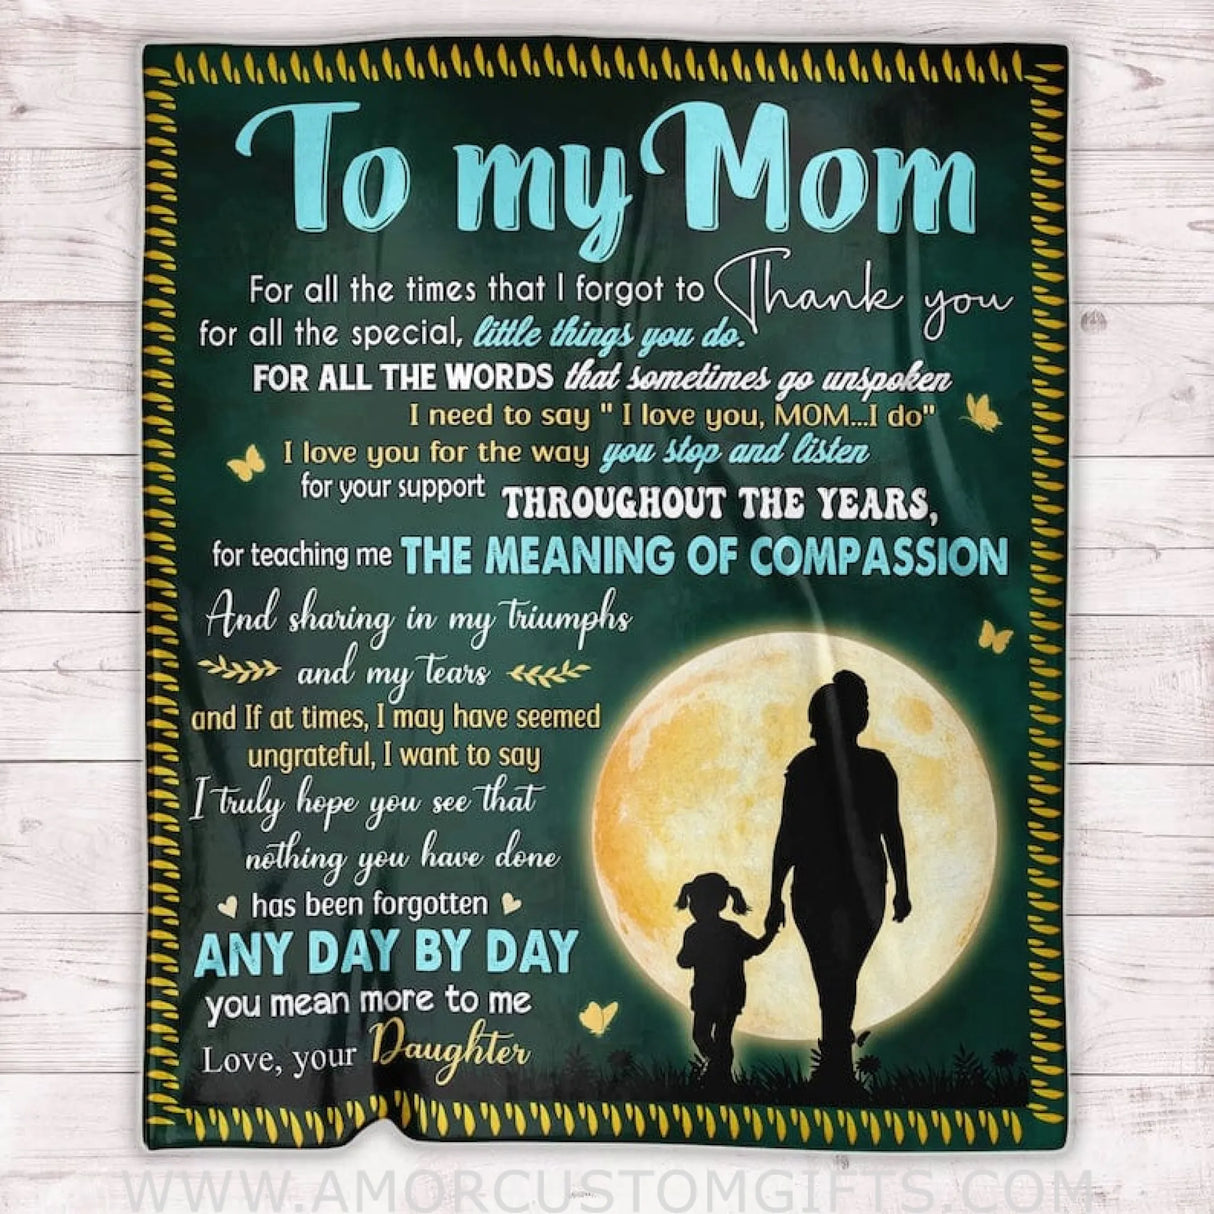 Blanket To My Mom Blanket, Personalized Throw Blanket For Mom, Customized Message Blanket For Mother, Mother's Day Gift, Birthday Idea Gift